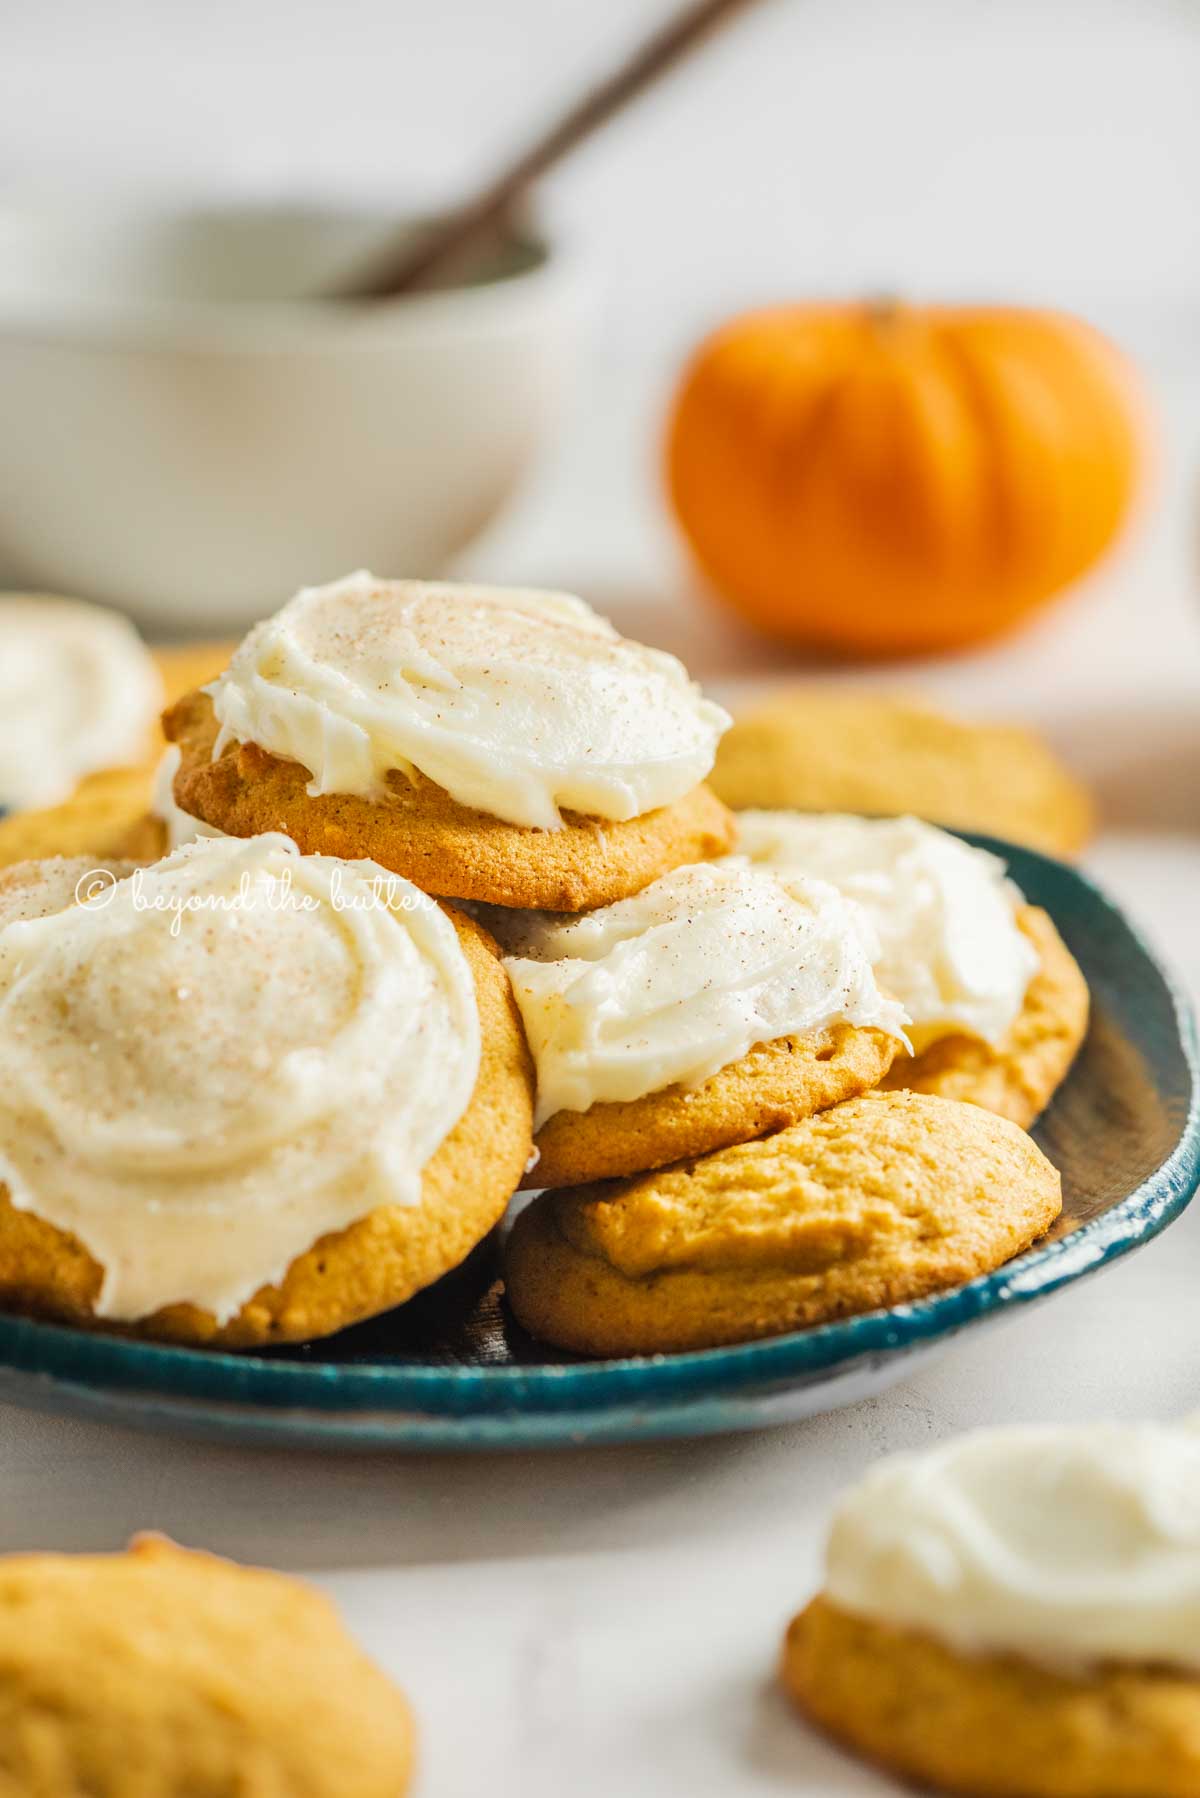 Pumpkin cinnamon cookies topped with cream cheese frosting served on plate with more cookies and pumpkin in the background | All Images © Beyond the Butter™